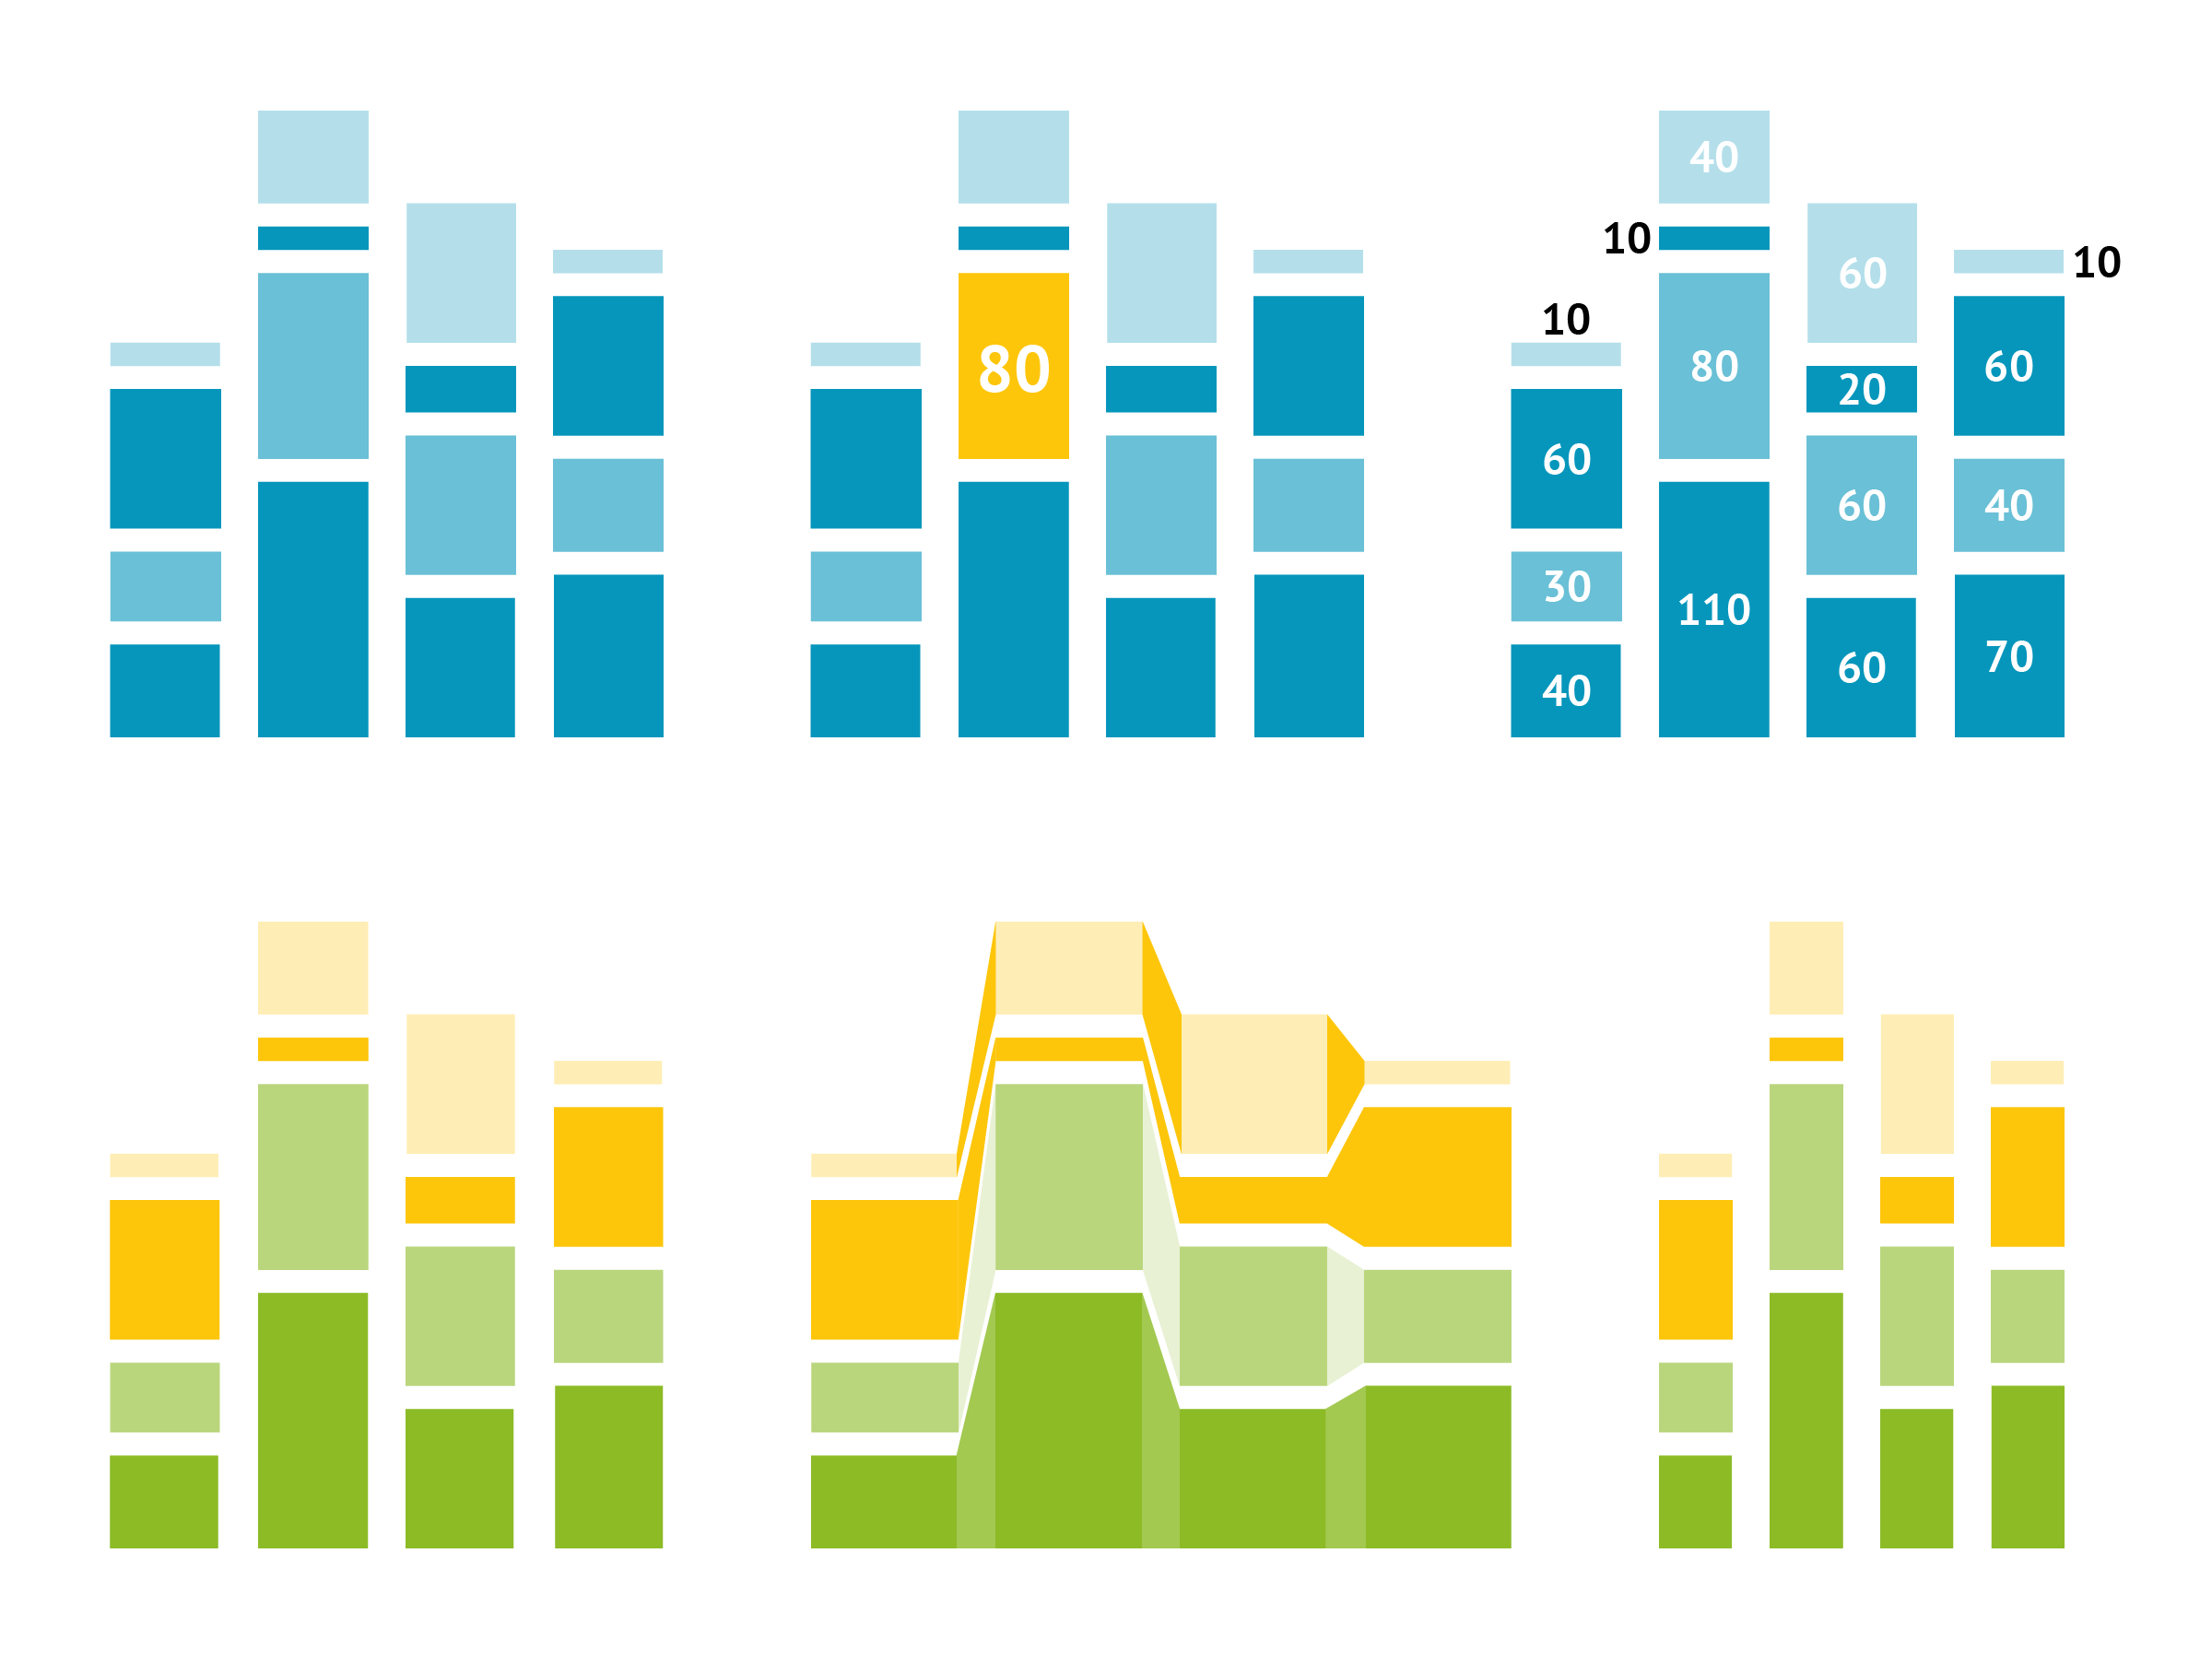 The illustration shows that Styling possibilities of Datylon include multiple coloring options, highlighting certain chart elements, advanced label placements, and non-destructive scaling